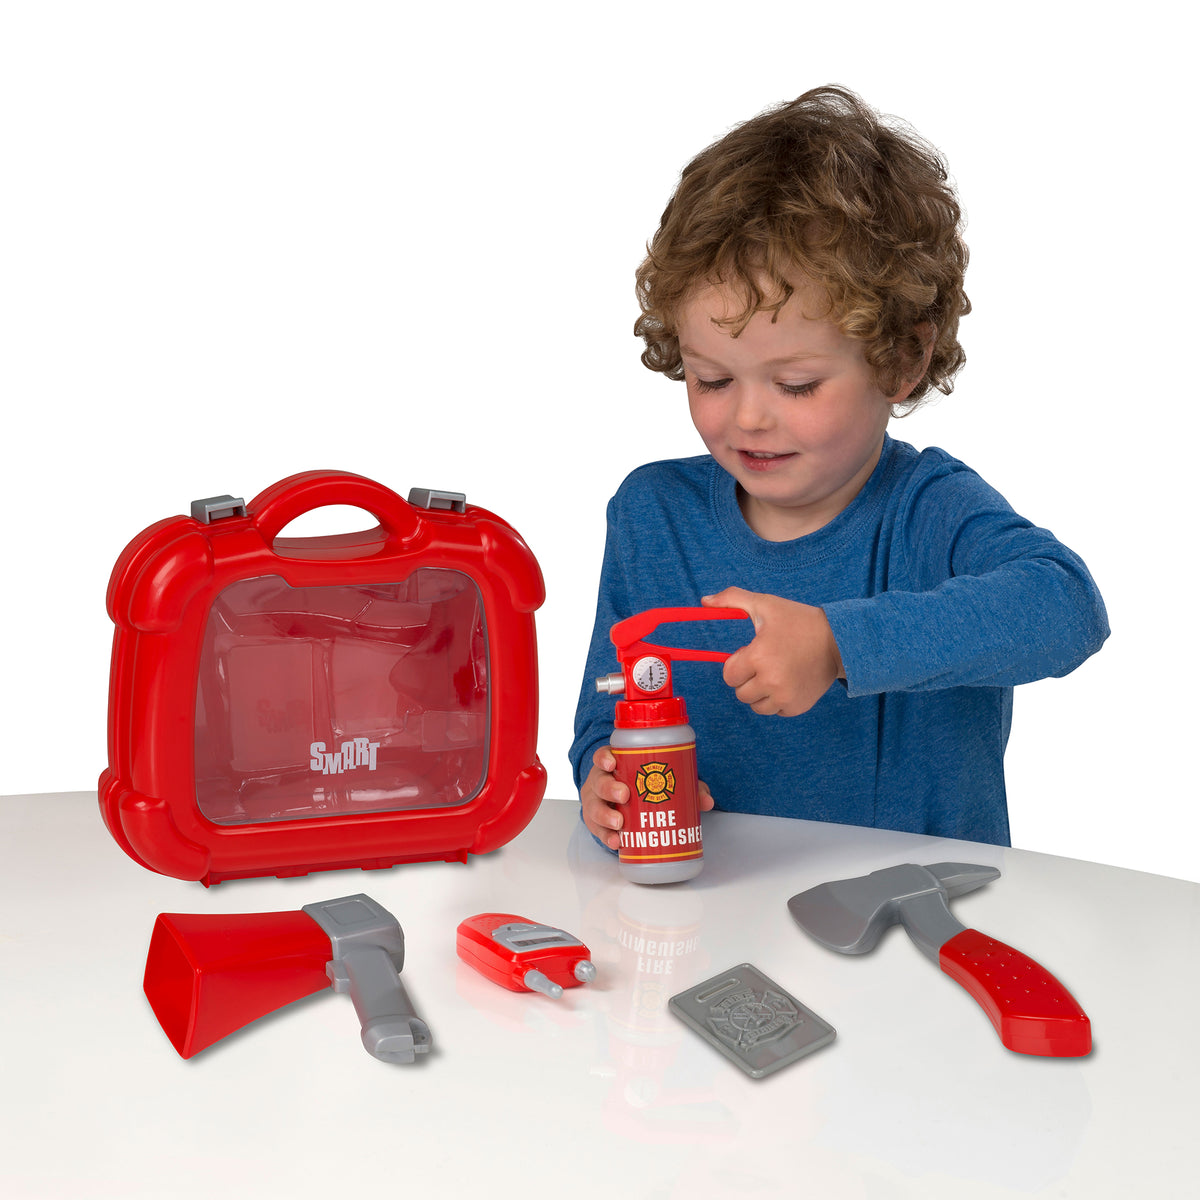 Smart Fire and Rescue Playset Case